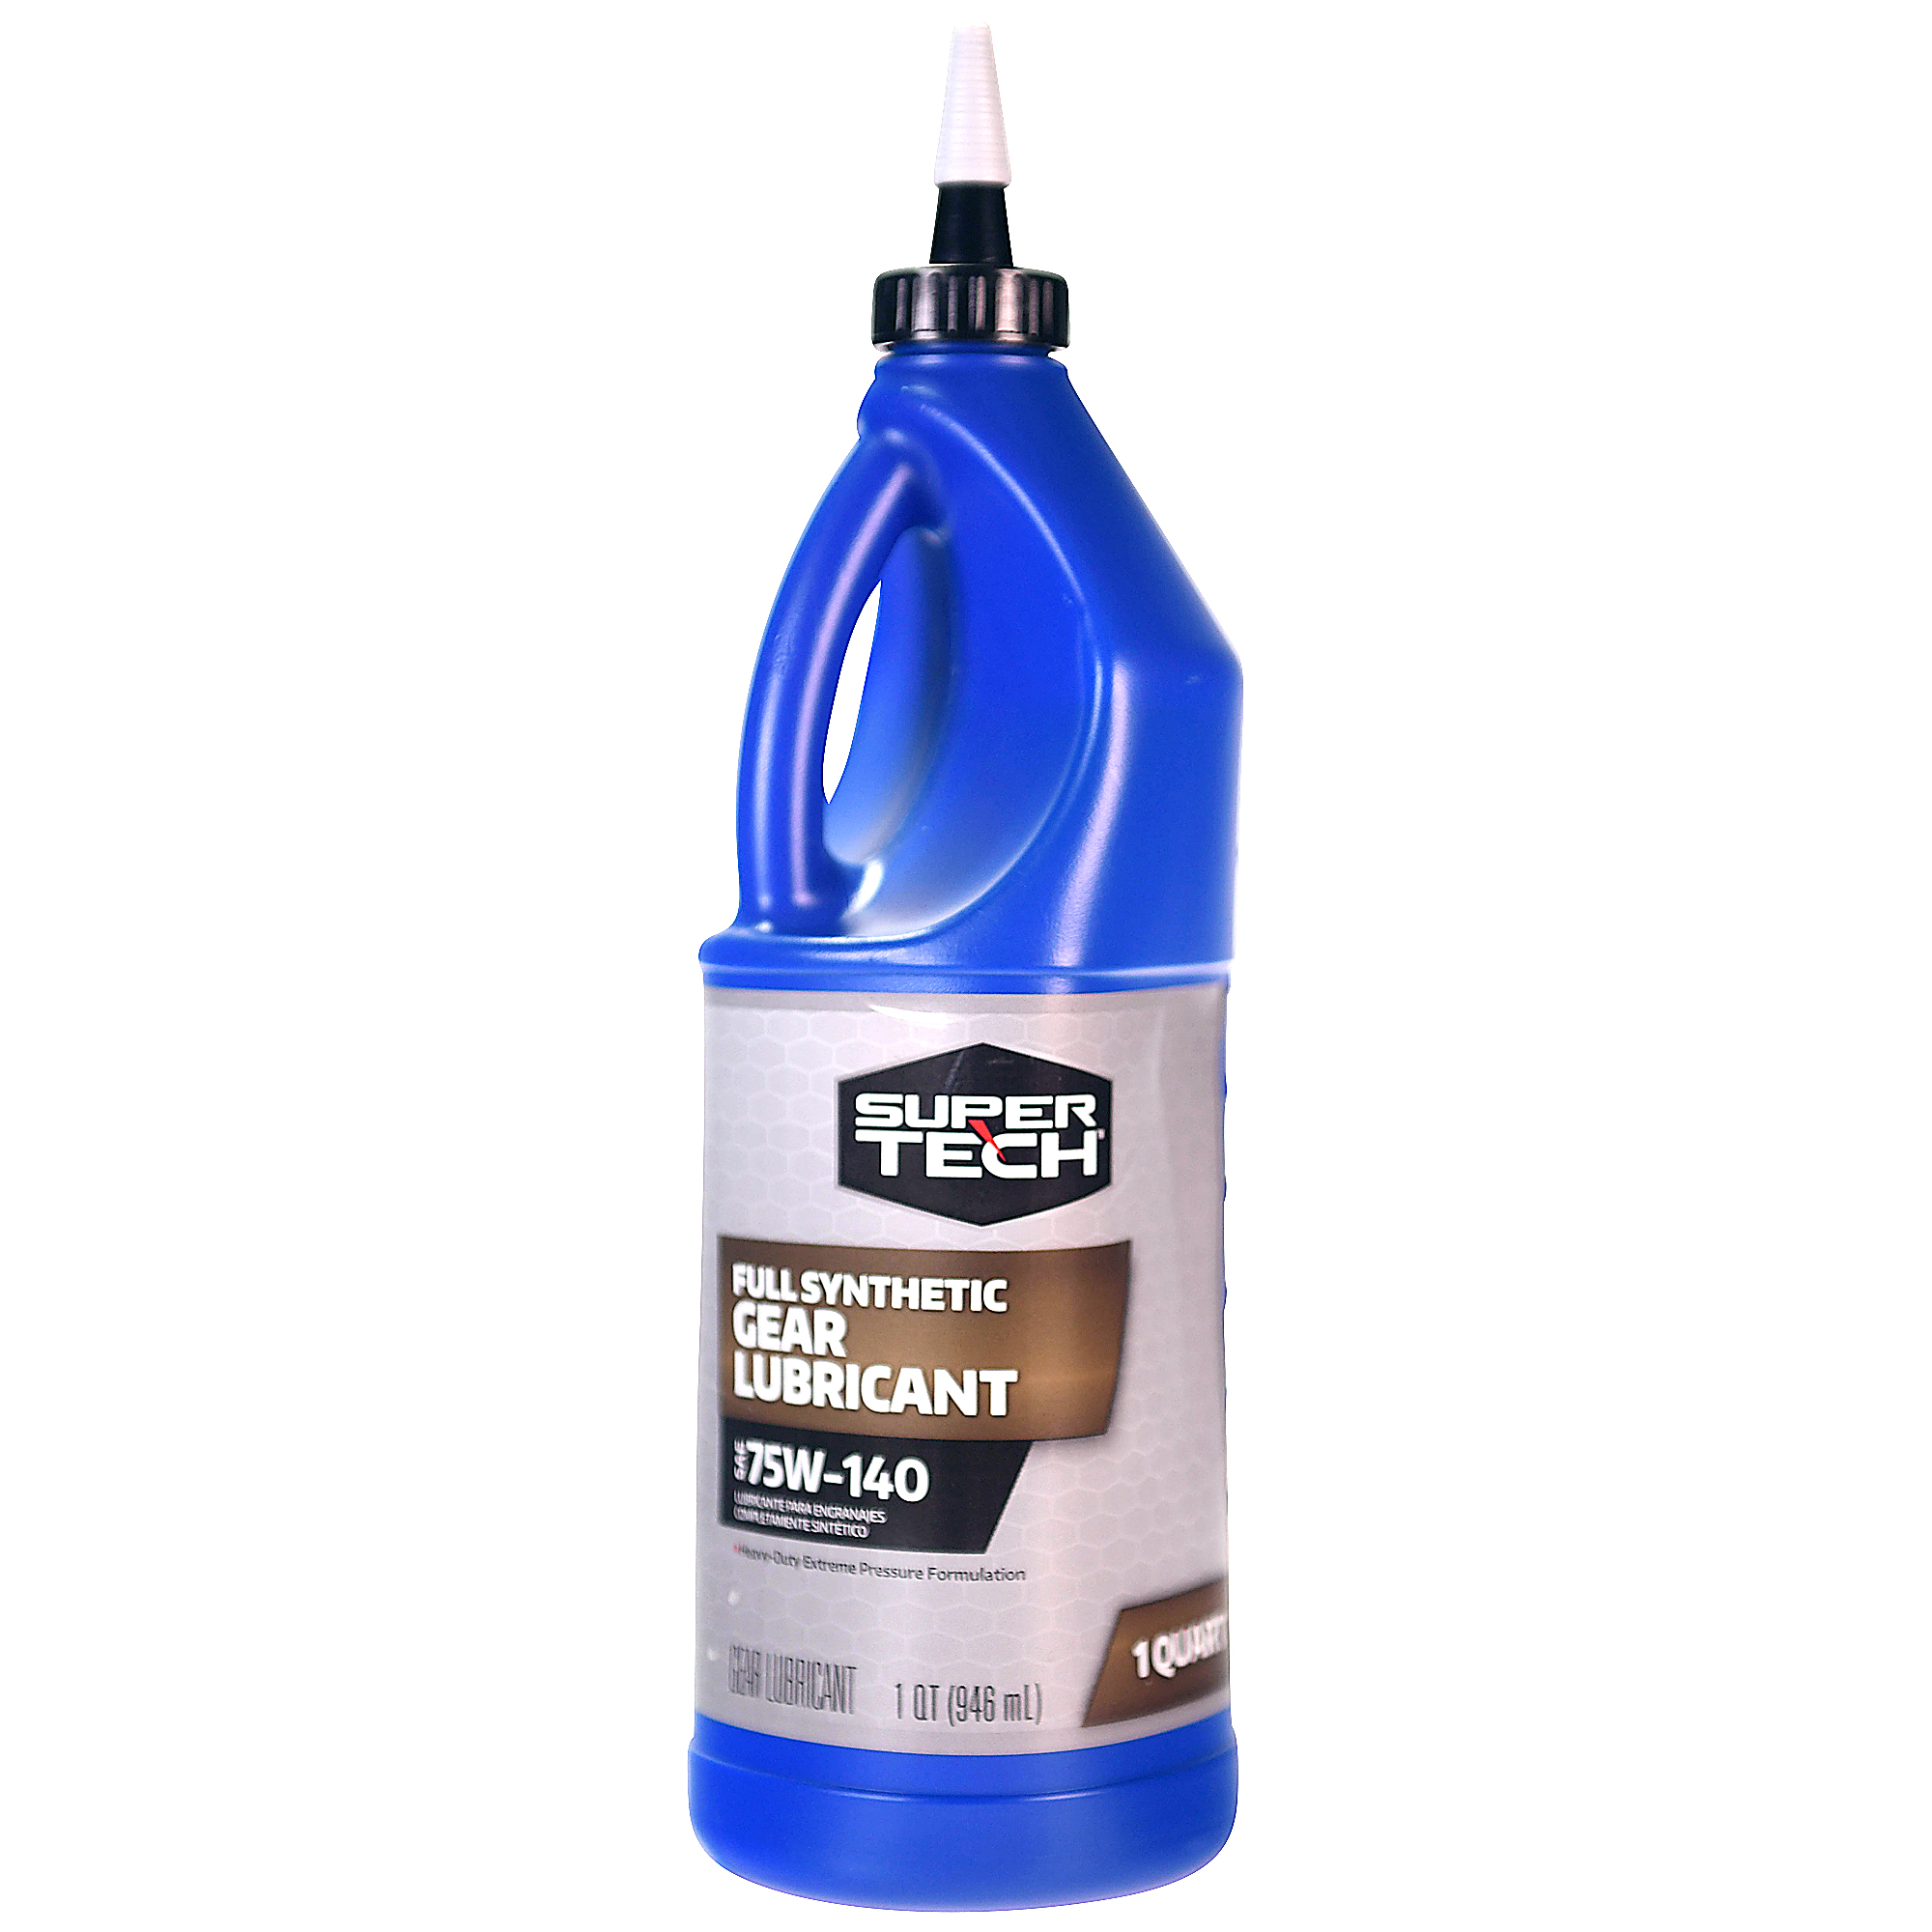 Super Tech SAE 75W-140 Full Synthetic Gear Lubricant Bottle, 1 Quart - image 1 of 4